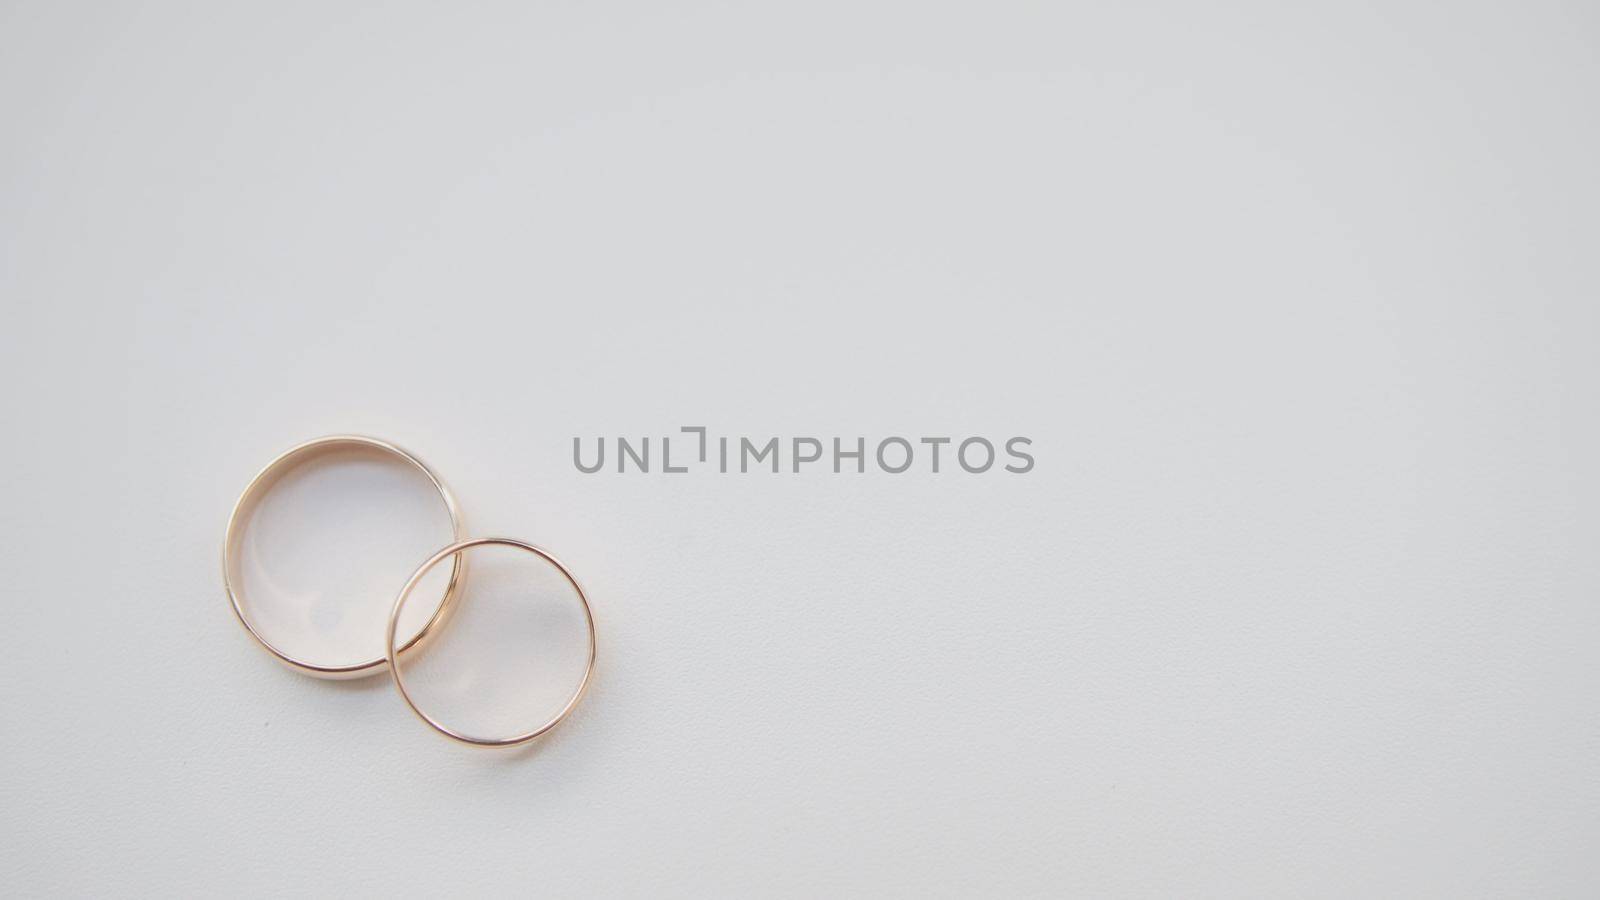 Golden wedding rings on white background, close up